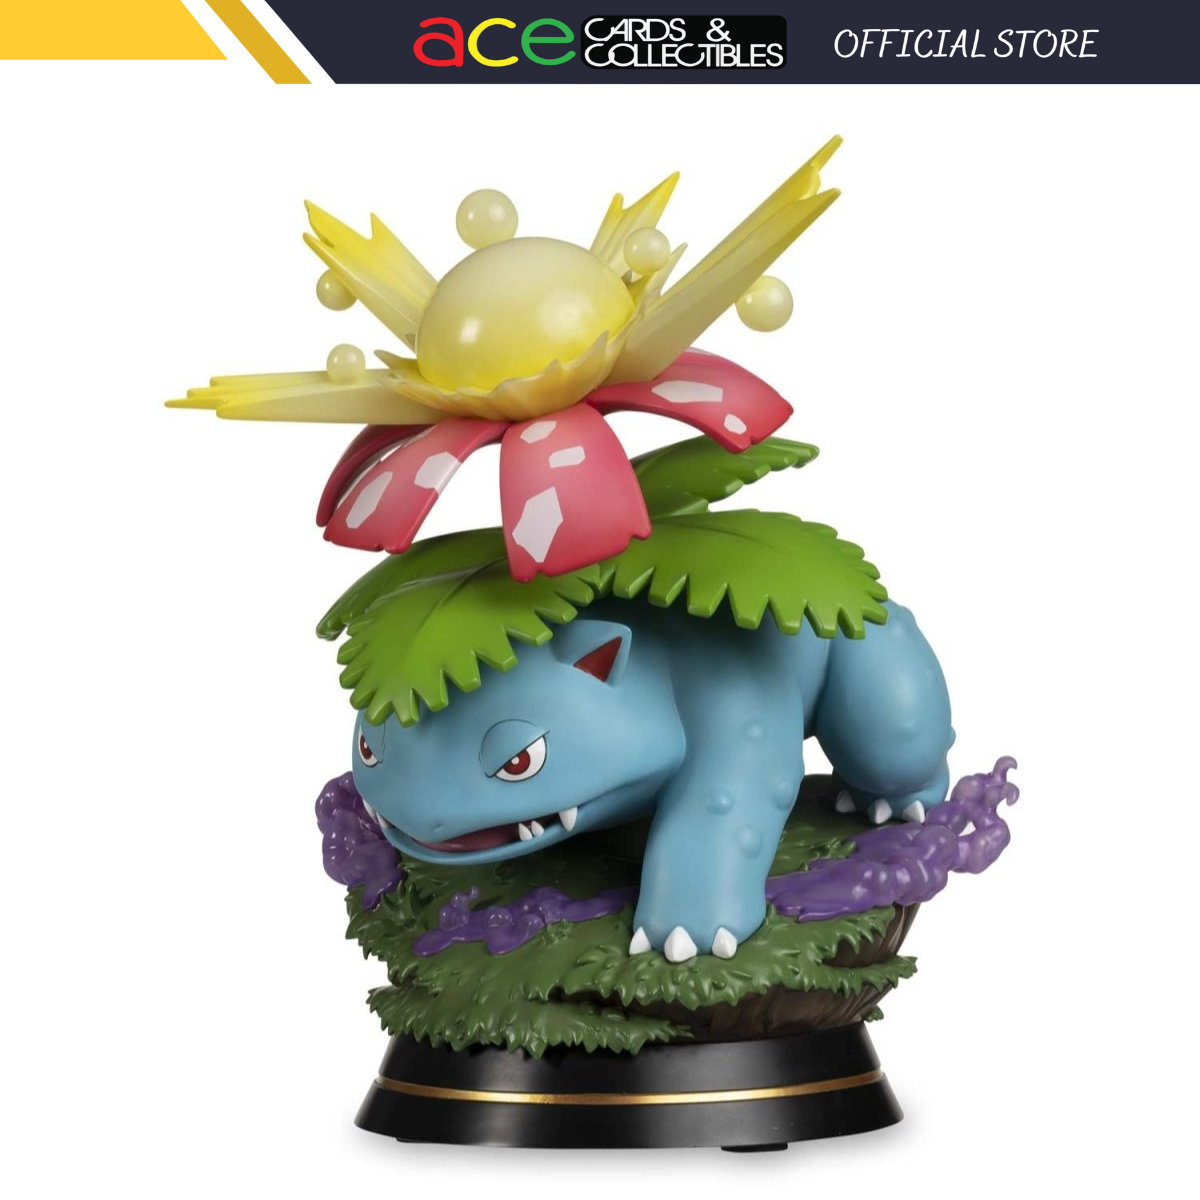 Venusaur Charging Light Figure By First 4 Figures-Pokemon Centre-Ace Cards & Collectibles